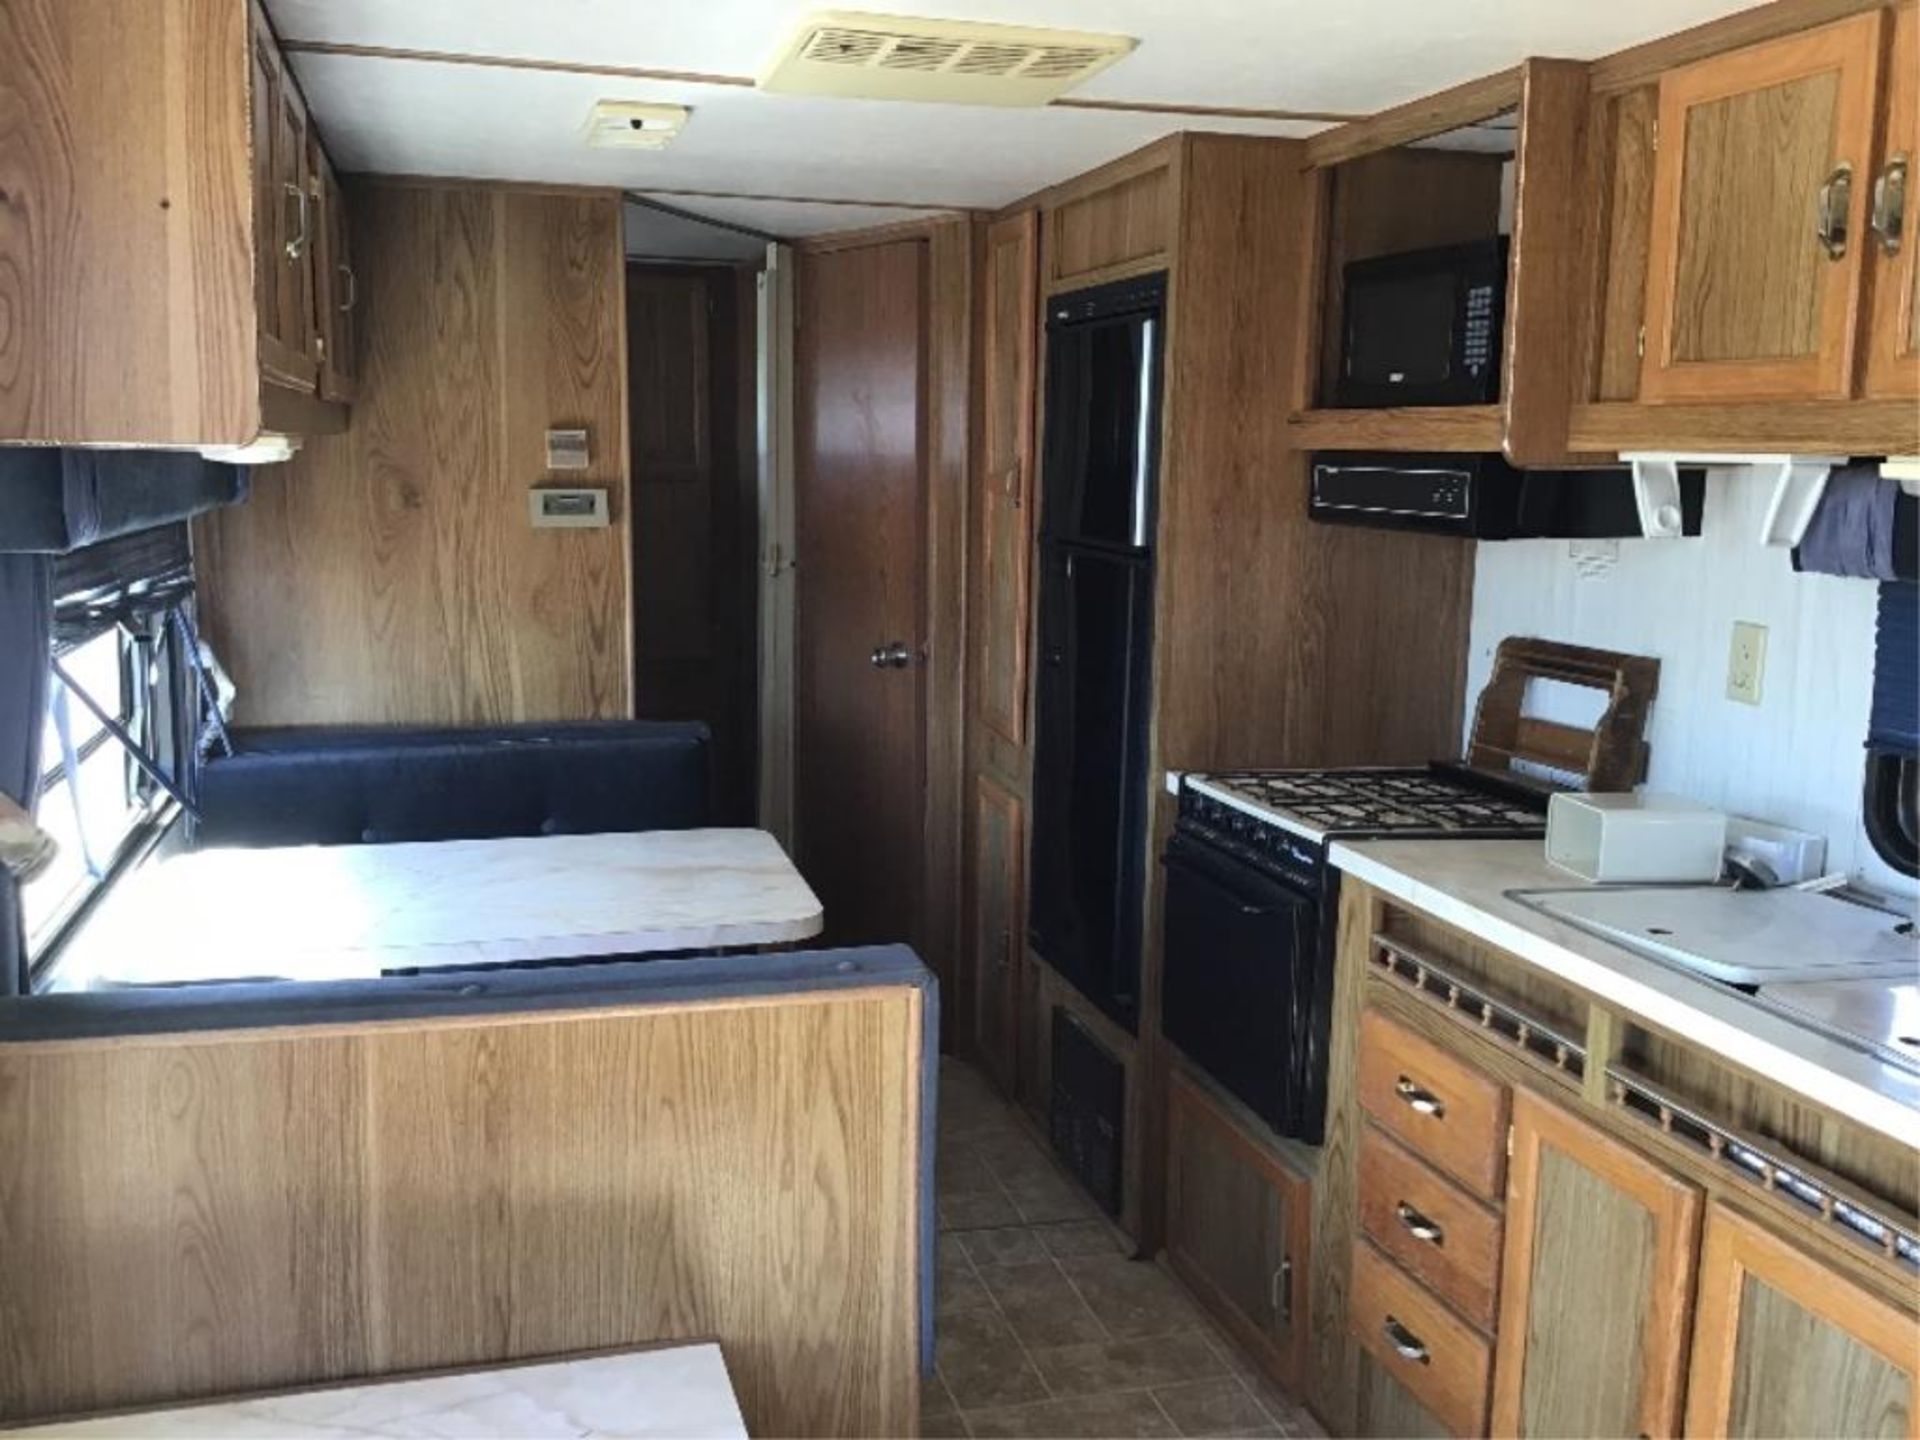 Wildwood by Rockwood Travel Trailer NO VIN sells w/BOS Only, c/w Stabilizer Hitch, Bunk Beds, Sleeps - Image 7 of 11